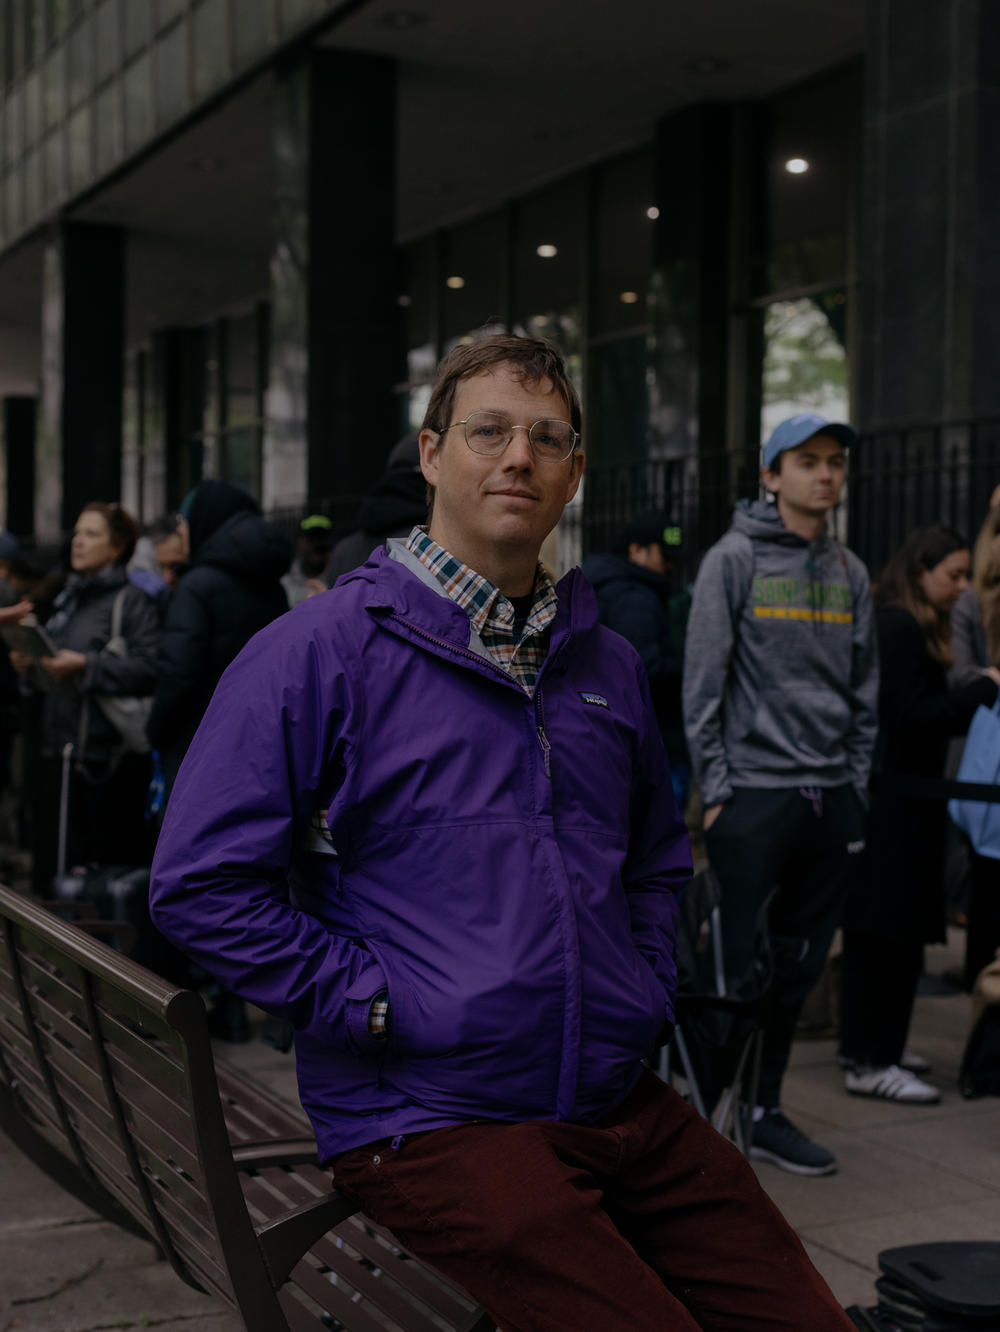 Among the crowd was Cameron Cauffman, 39, who took a four-hour train ride to get in line.